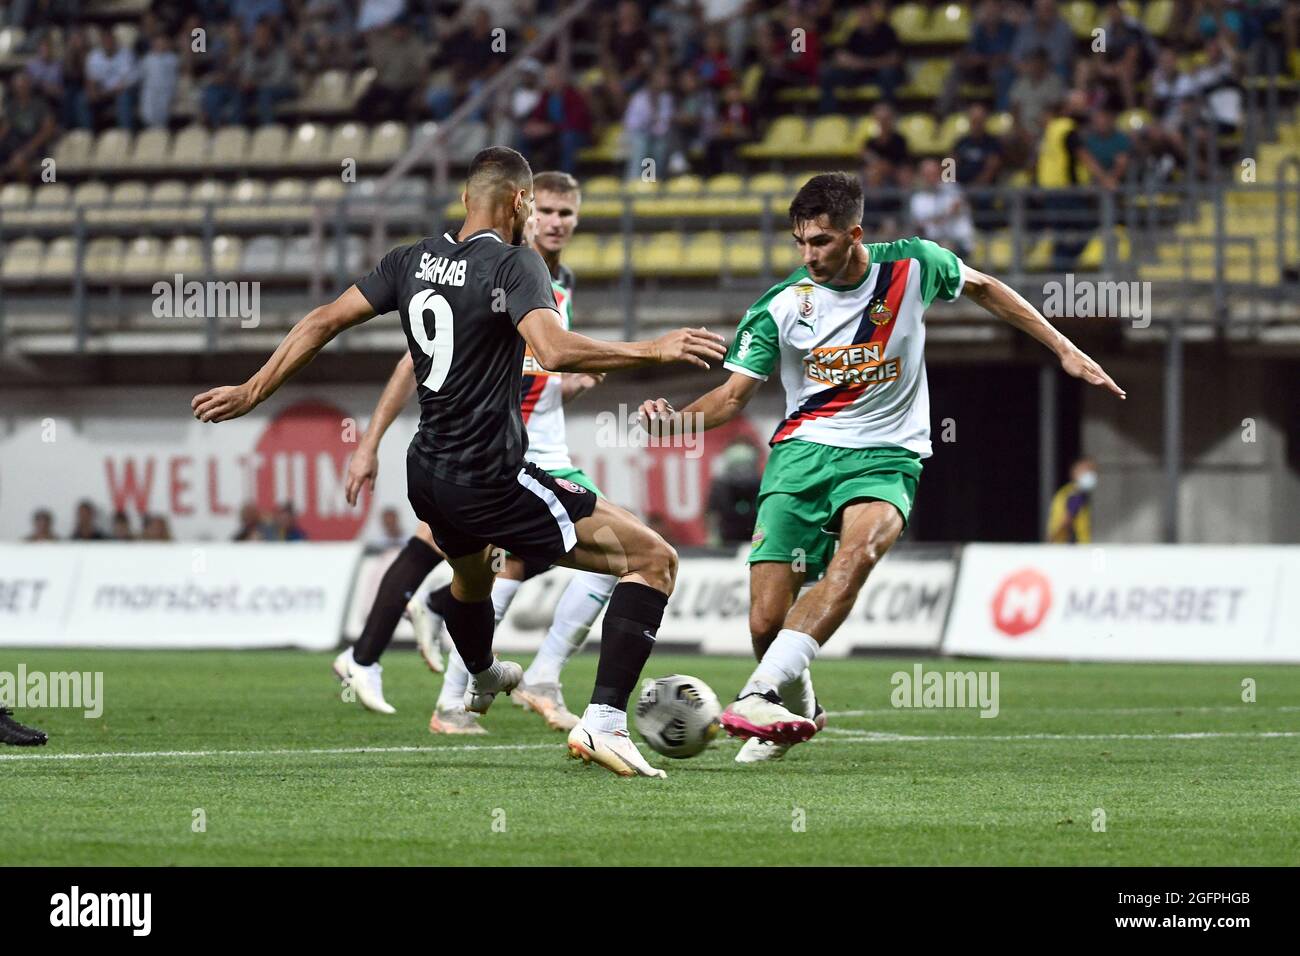 ZAPORIZHZHIA, UKRAINE - AUGUST 26, 2021 - Forward Shahab Zahedi Tabar (L) of FC Zorya Luhansk is seen in action with a player of SK Rapid Wien during the 2021/2022 UEFA Europa League play-off 2nd leg game at the Slavutych Arena, Zaporizhzhia, southeastern Ukraine. Stock Photo